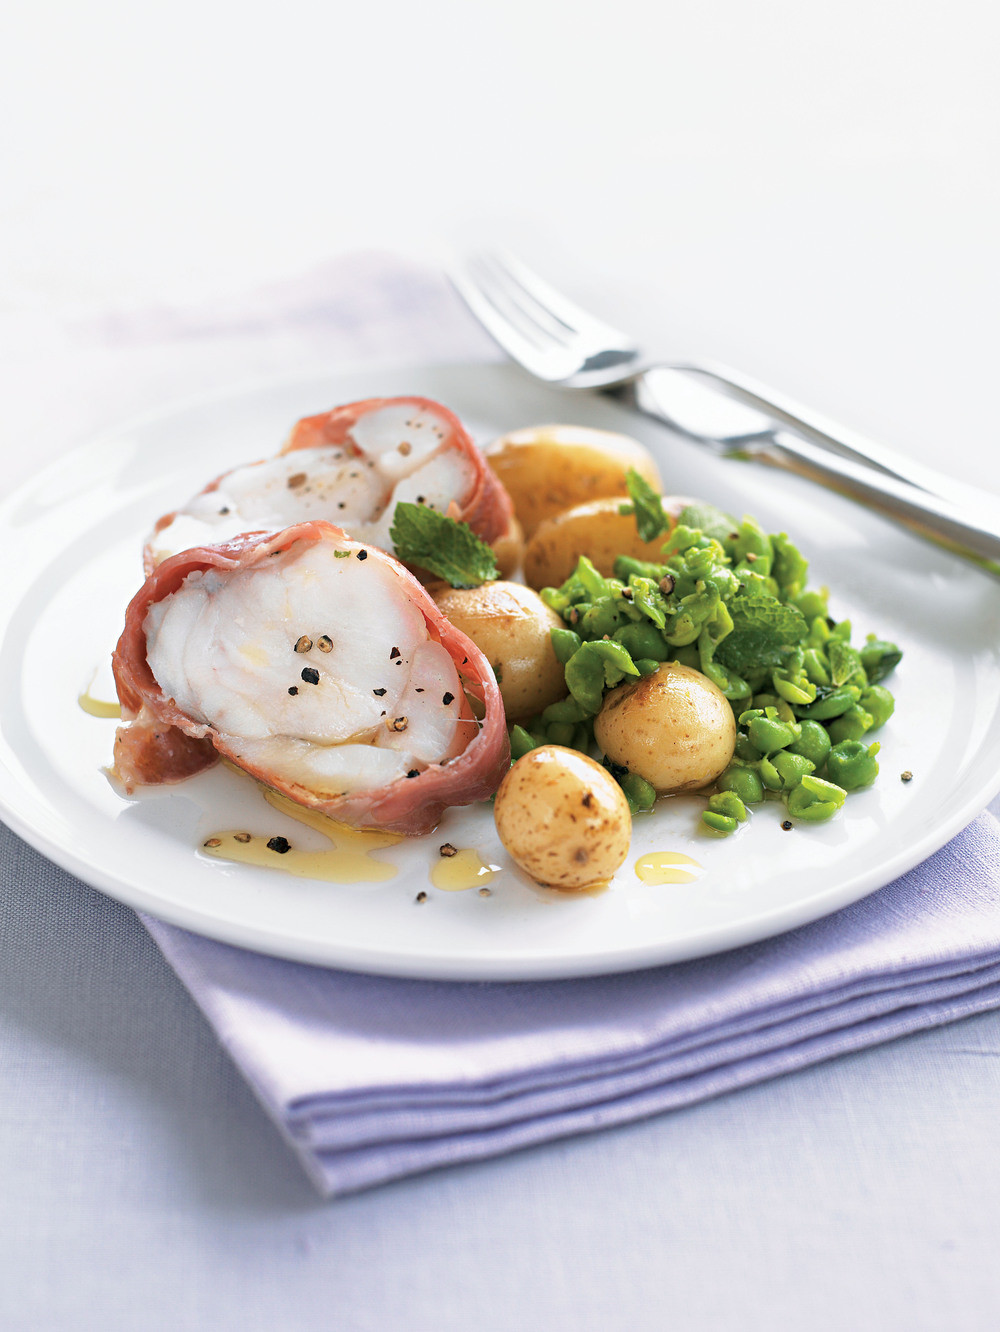 Recipes For Monk Fish
 Monkfish Wrapped in Parma Ham recipe